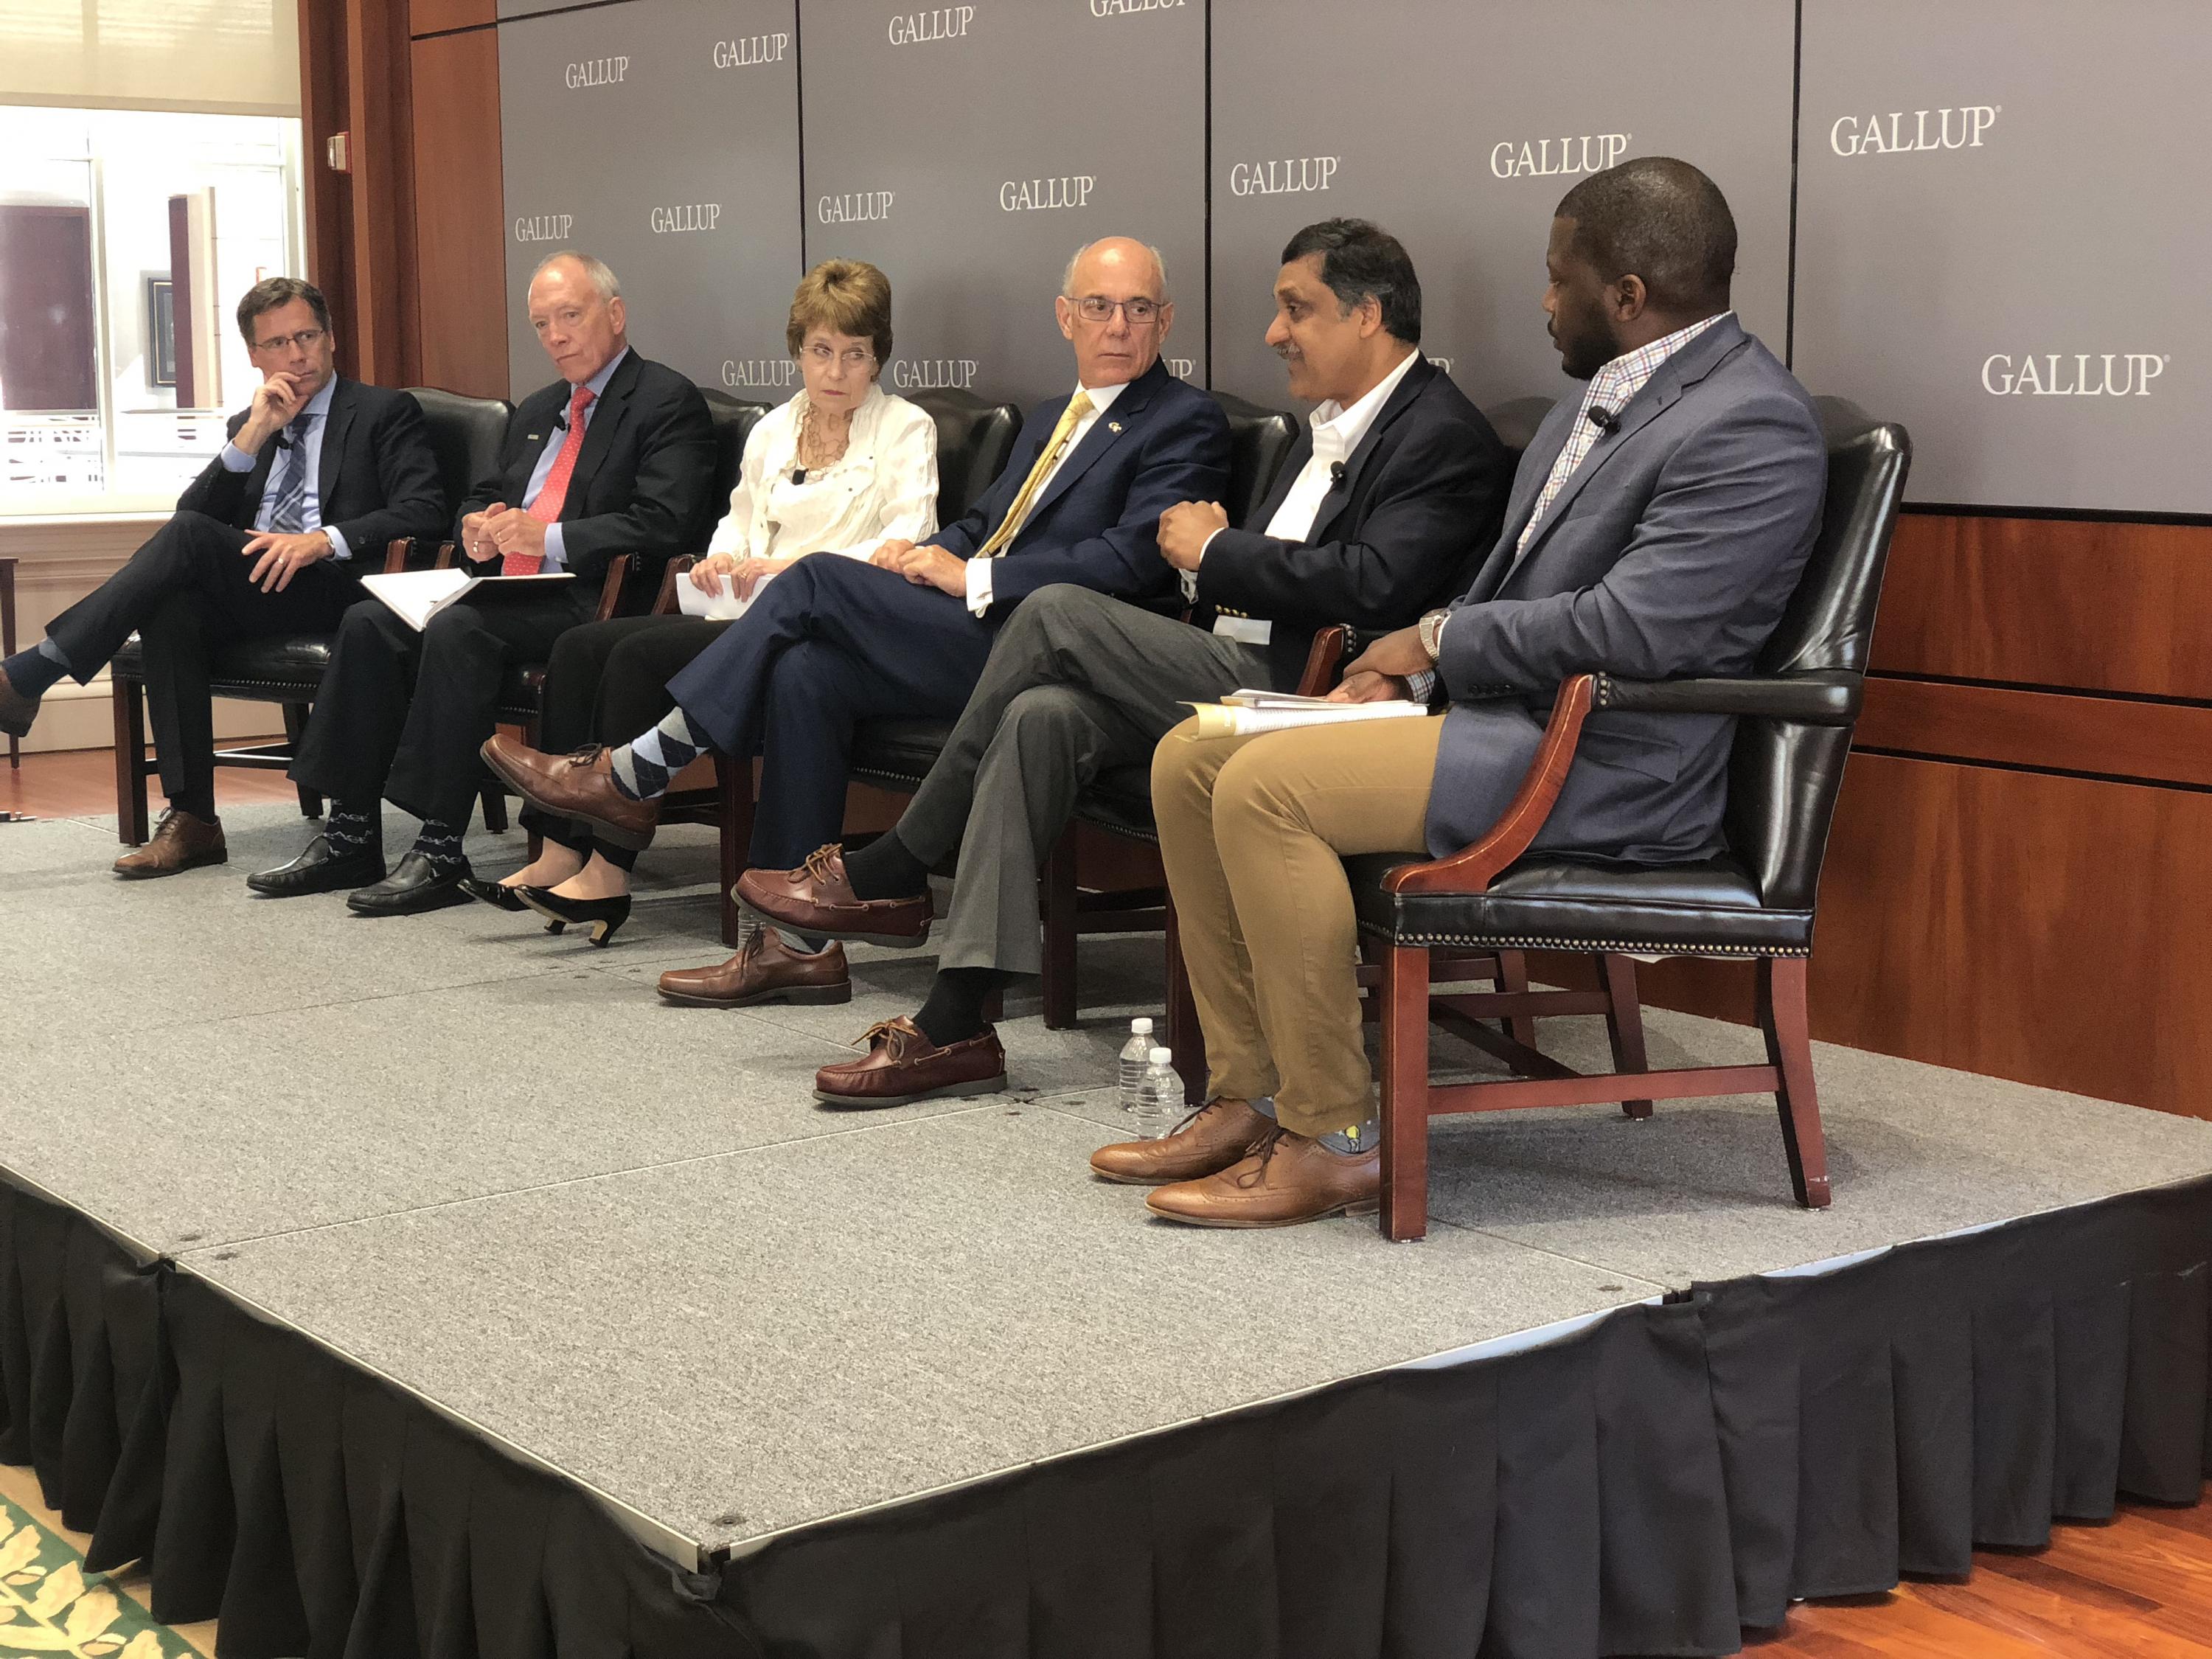 Some of the nation's leading thinkers in higher education gathered with Georgia Tech in Washington, D.C. to talk about what the future holds for colleges and universities across the country.